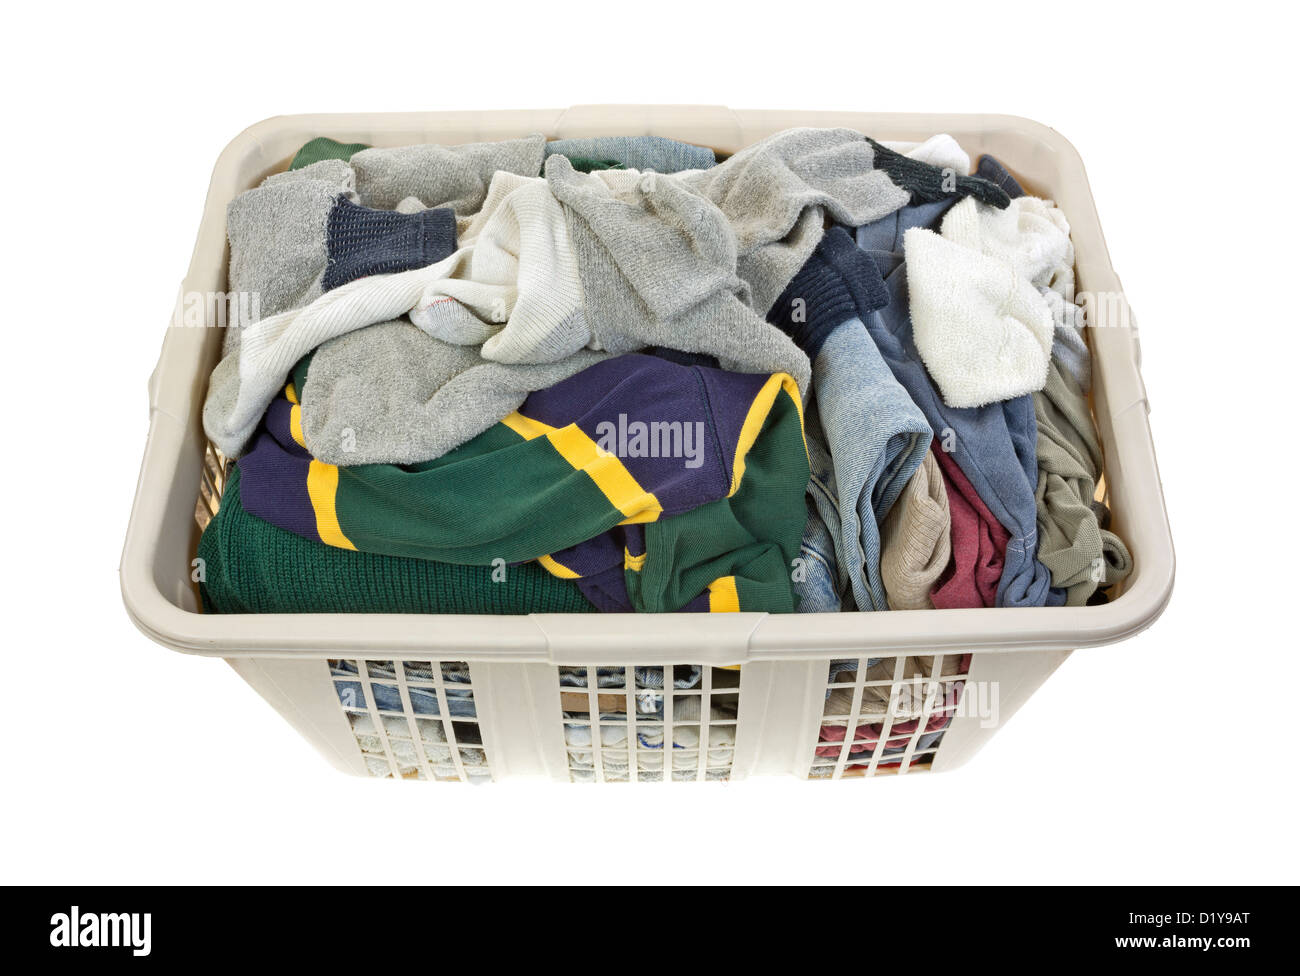 A load of men's clothing freshly laundered in a plastic hamper on a white background. Stock Photo